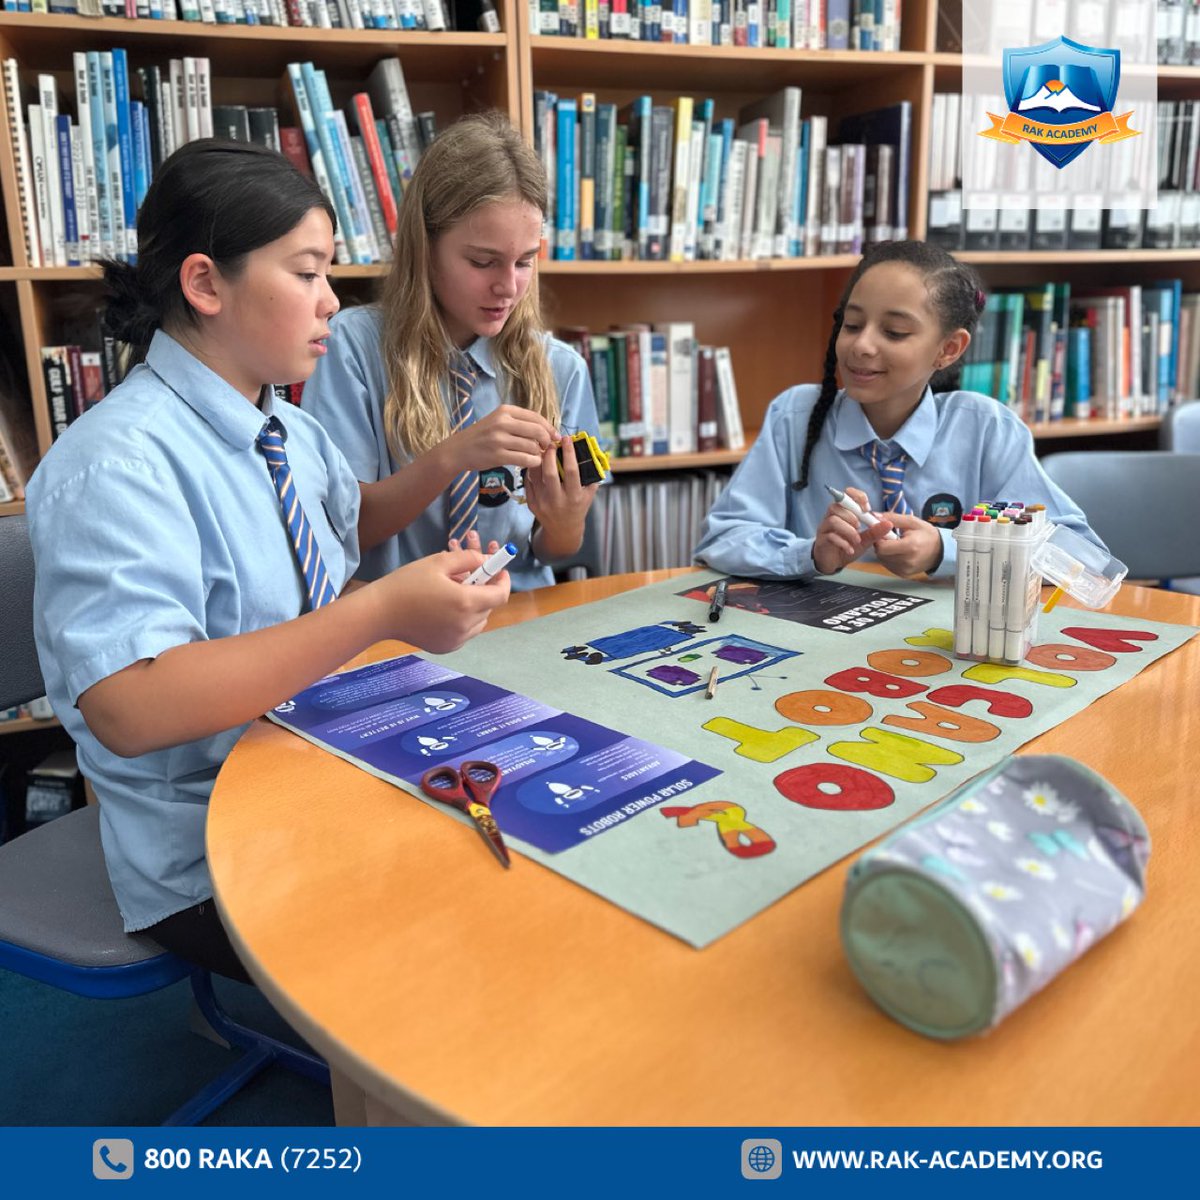 🐝📚 Celebrating Science Fair Brilliance! 🧪🔬

🎉 We are so proud of these amazing young scientists and their quest for knowledge! 🔬🌟

📸 Check out their incredible projects!👆 #rakacademy #raka #rasalkhaimah #khuzam #ScienceFair2023 #PassionForScience